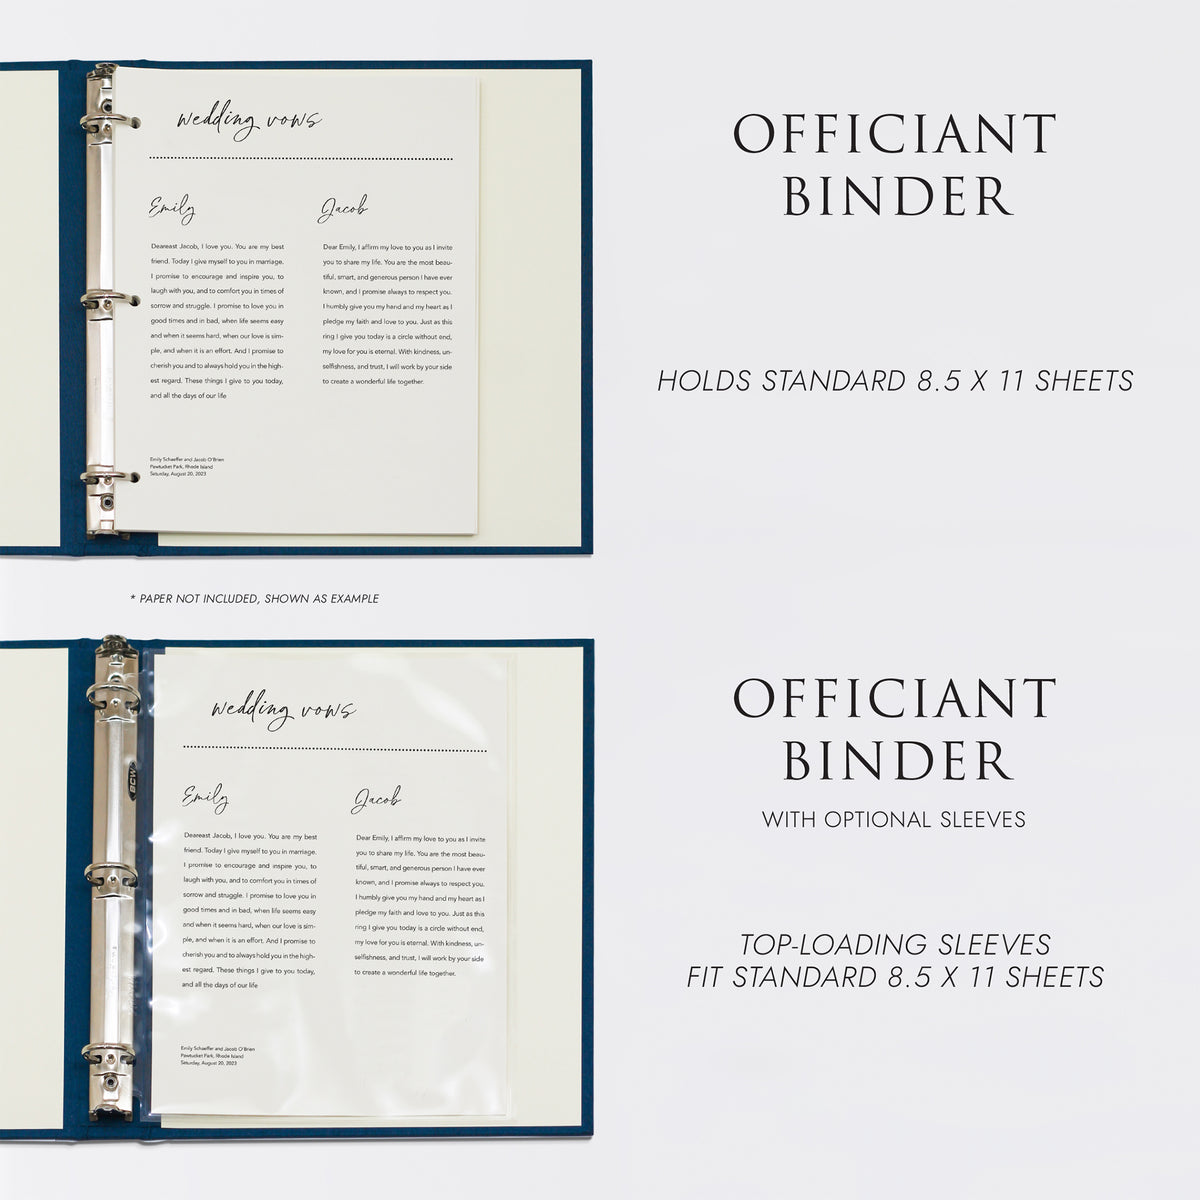 Officiant Binder with Amethyst Silk Cover